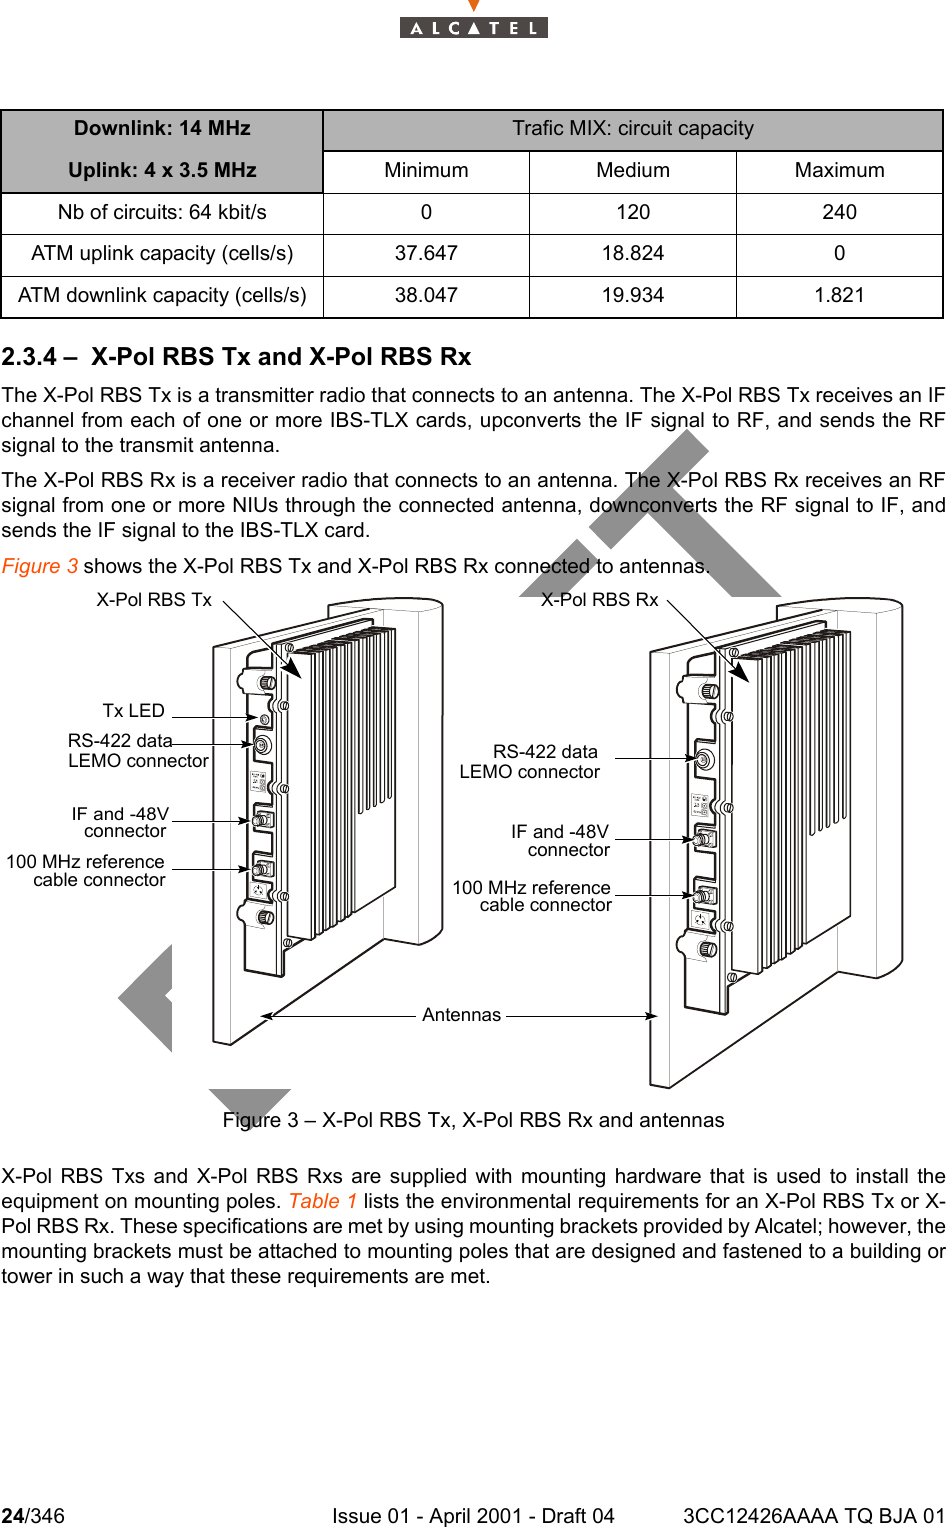 24/346 Issue 01 - April 2001 - Draft 04 3CC12426AAAA TQ BJA 011042.3.4 – X-Pol RBS Tx and X-Pol RBS RxThe X-Pol RBS Tx is a transmitter radio that connects to an antenna. The X-Pol RBS Tx receives an IFchannel from each of one or more IBS-TLX cards, upconverts the IF signal to RF, and sends the RFsignal to the transmit antenna.The X-Pol RBS Rx is a receiver radio that connects to an antenna. The X-Pol RBS Rx receives an RFsignal from one or more NIUs through the connected antenna, downconverts the RF signal to IF, andsends the IF signal to the IBS-TLX card.Figure 3 shows the X-Pol RBS Tx and X-Pol RBS Rx connected to antennas.Figure 3 – X-Pol RBS Tx, X-Pol RBS Rx and antennasX-Pol RBS Txs and X-Pol RBS Rxs are supplied with mounting hardware that is used to install theequipment on mounting poles. Table 1 lists the environmental requirements for an X-Pol RBS Tx or X-Pol RBS Rx. These specifications are met by using mounting brackets provided by Alcatel; however, themounting brackets must be attached to mounting poles that are designed and fastened to a building ortower in such a way that these requirements are met.Downlink: 14 MHz Trafic MIX: circuit capacityUplink: 4 x 3.5 MHz Minimum Medium MaximumNb of circuits: 64 kbit/s 0 120 240ATM uplink capacity (cells/s) 37.647 18.824 0ATM downlink capacity (cells/s) 38.047 19.934 1.821X-Pol RBS Tx X-Pol RBS RxRS-422 dataLEMO connectorIF and -48Vconnector100 MHz referencecable connectorAntennasRS-422 dataLEMO connectorIF and -48Vconnector100 MHz referencecable connectorTx LED